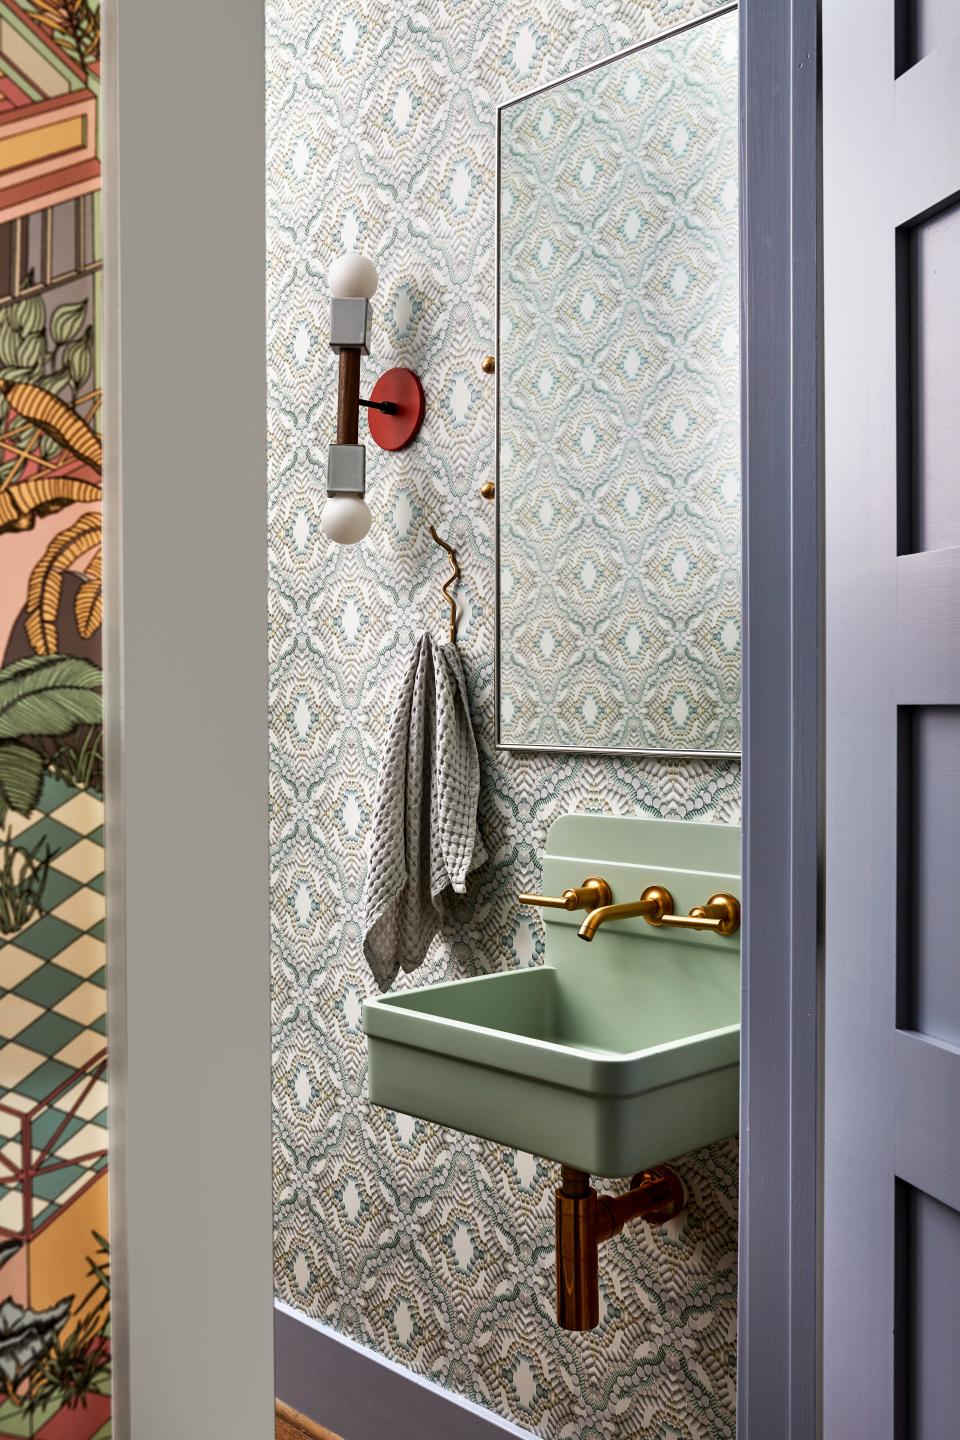 The powder room is a meditative hideaway that conjures its own version of the outdoors. As the owners tell it, Flavor Paper’s Placebo Effect wallpaper wasn’t the first choice. “It was supposed to be in a warmer colorway, but we didn’t think that the oranges, reds and blues worked with the cool tones we had decided on for the room. Then, Zoë and her team showed us a recolored version of the wallpaper, paired with a surface-mount Herbert basin by Nood. Suddenly the room became one of our favorite moments in the entire house,” says one half of the couple. A Farren mirror by CB2 emblazons one wall. The sconce is Cedar & Moss’s Stanton marque.